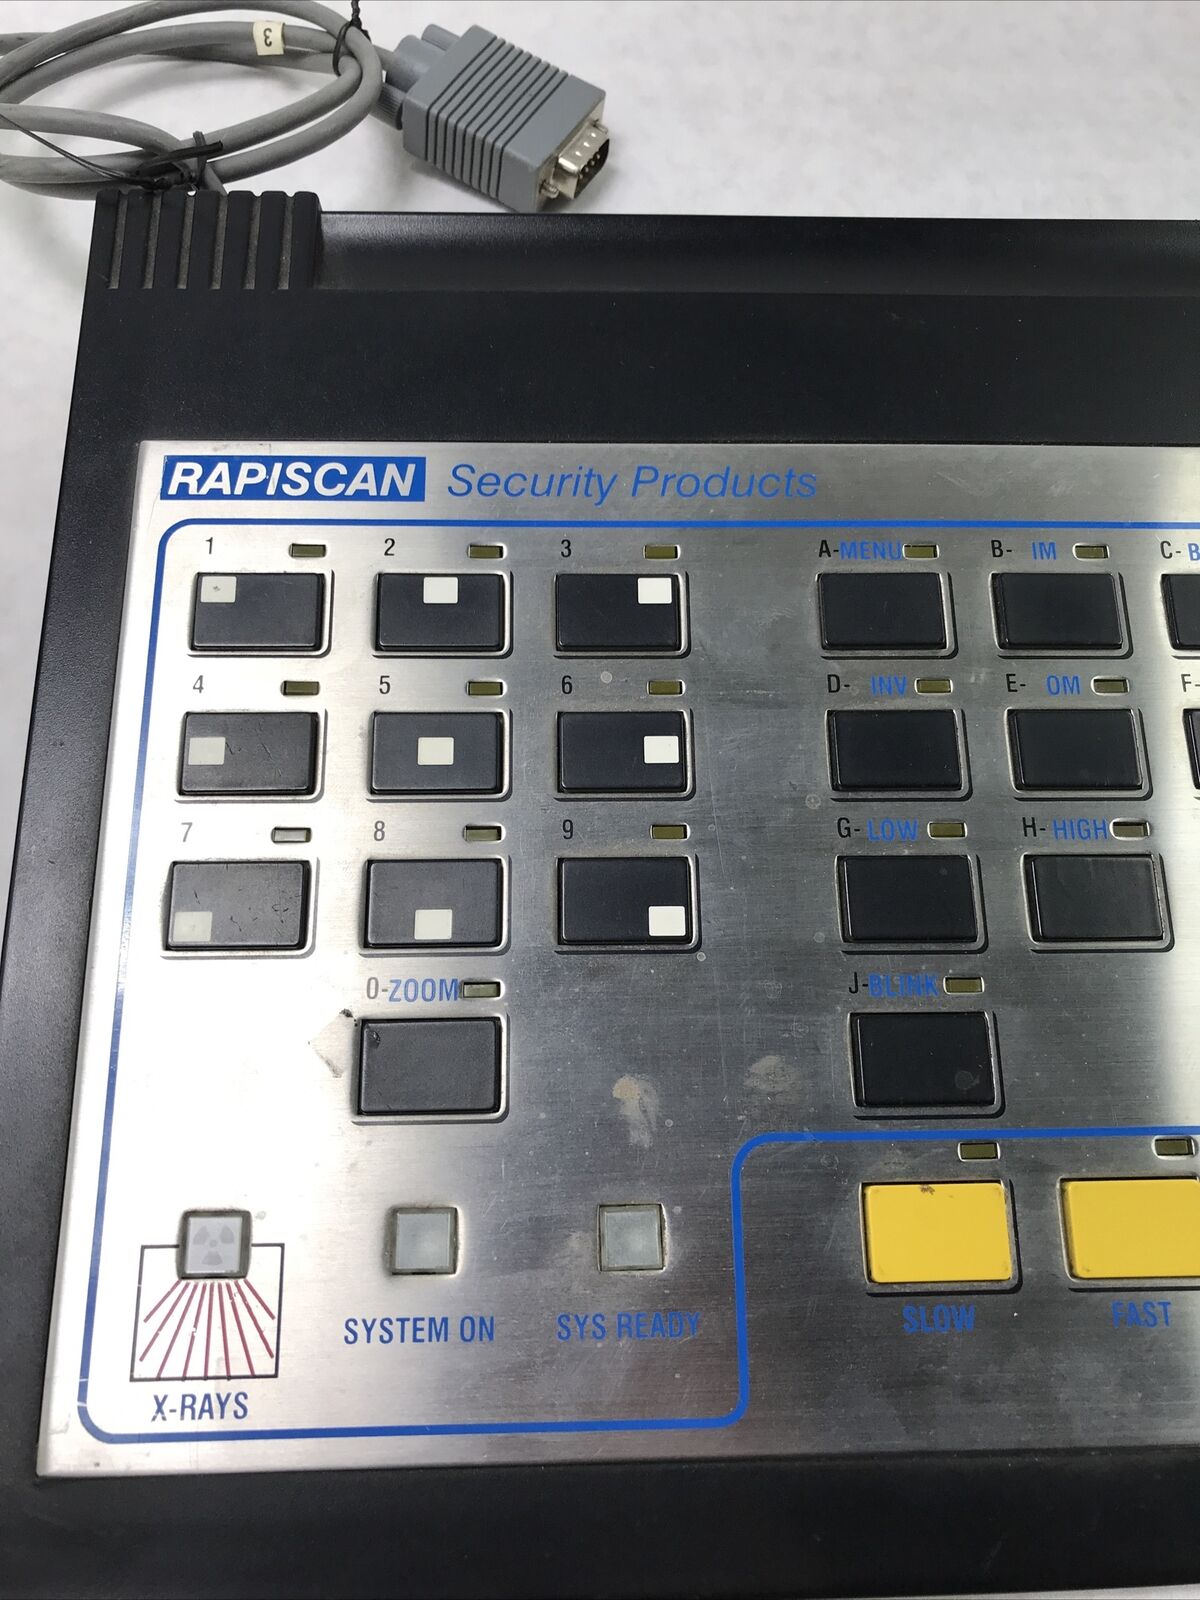 Rapiscan TA66164 Security Products Dual Vision Control Panel